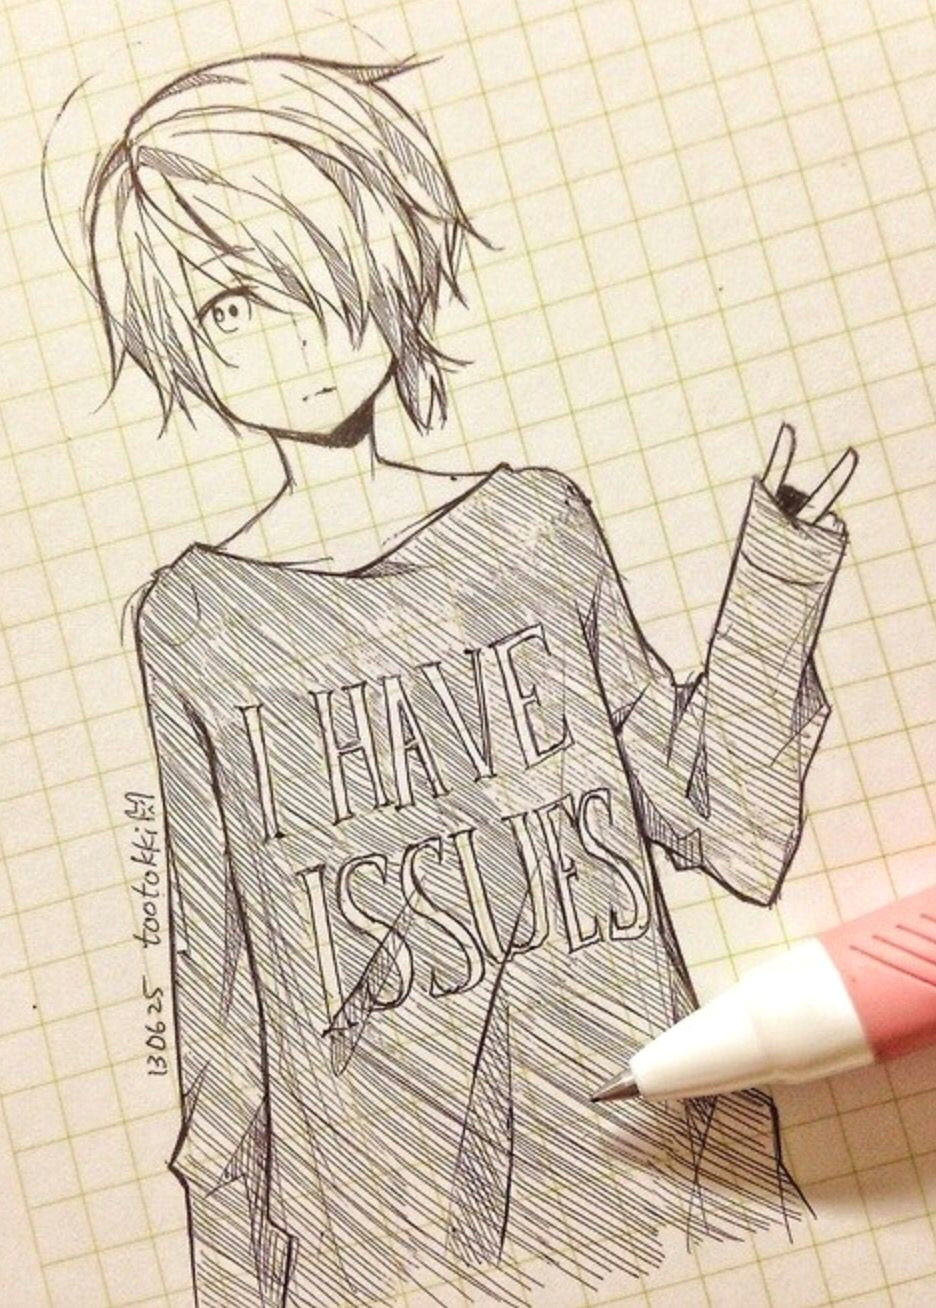 Anime V Manga Drawing Cute Anime Drawing tootokki I Have issues Sweater Anime Drawings